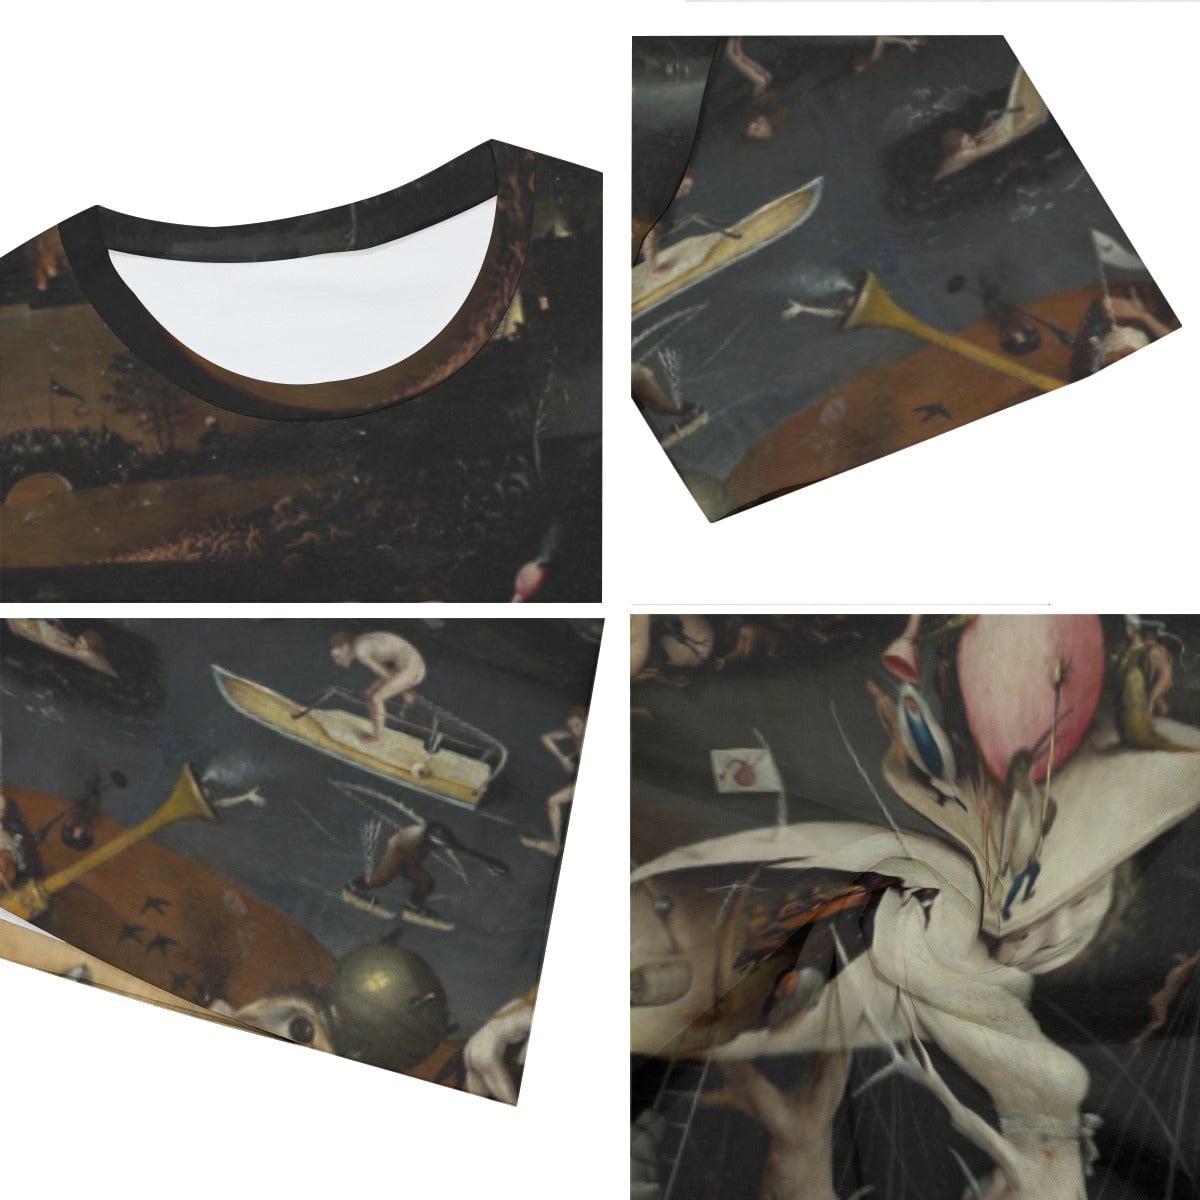 The Garden of Earthly Delights Hieronymus Bosch T-Shirt